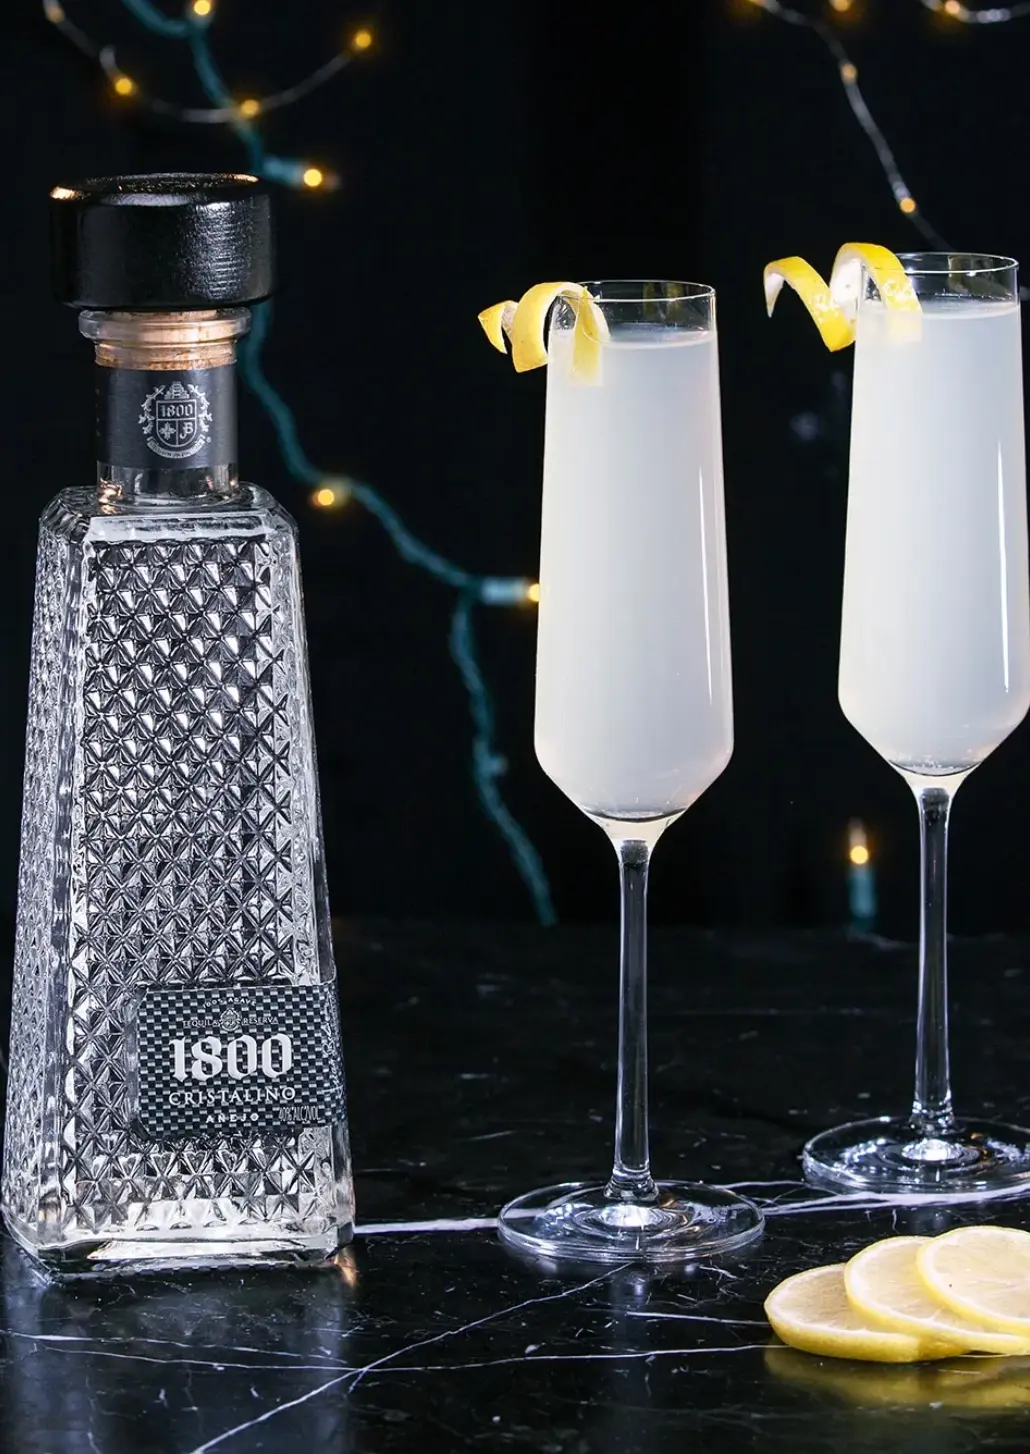 bottle of 1800 cristalino tequila and 2 champagne flutes of 75 jalisco cocktail